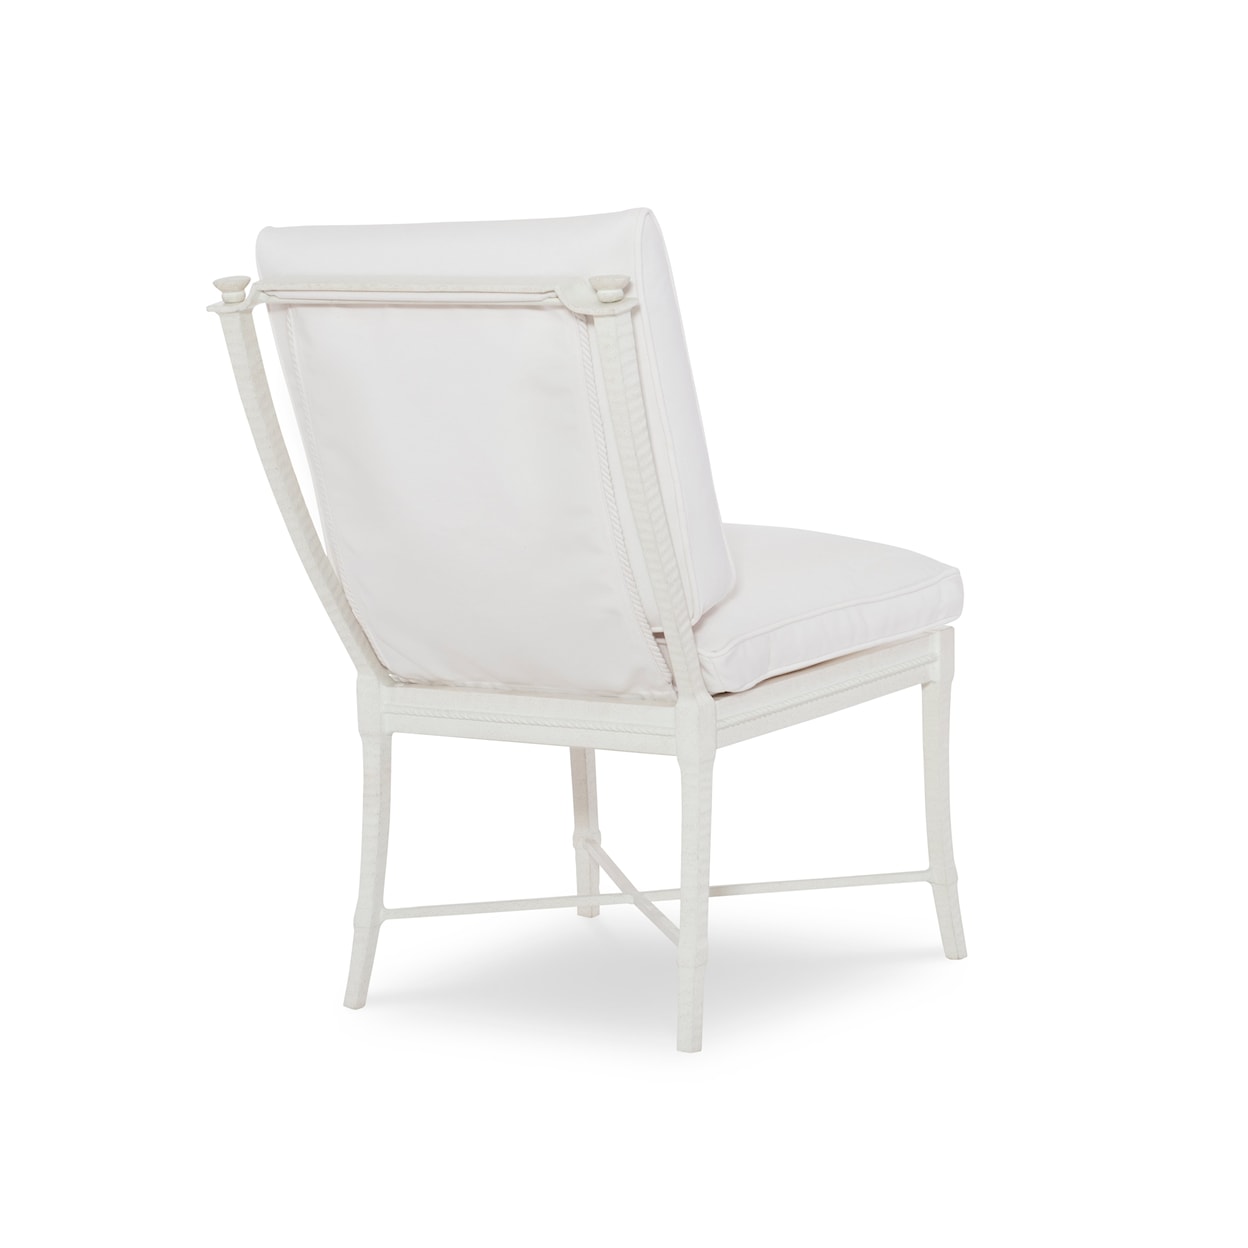 Century Andalusia Outdoor Dining Chair